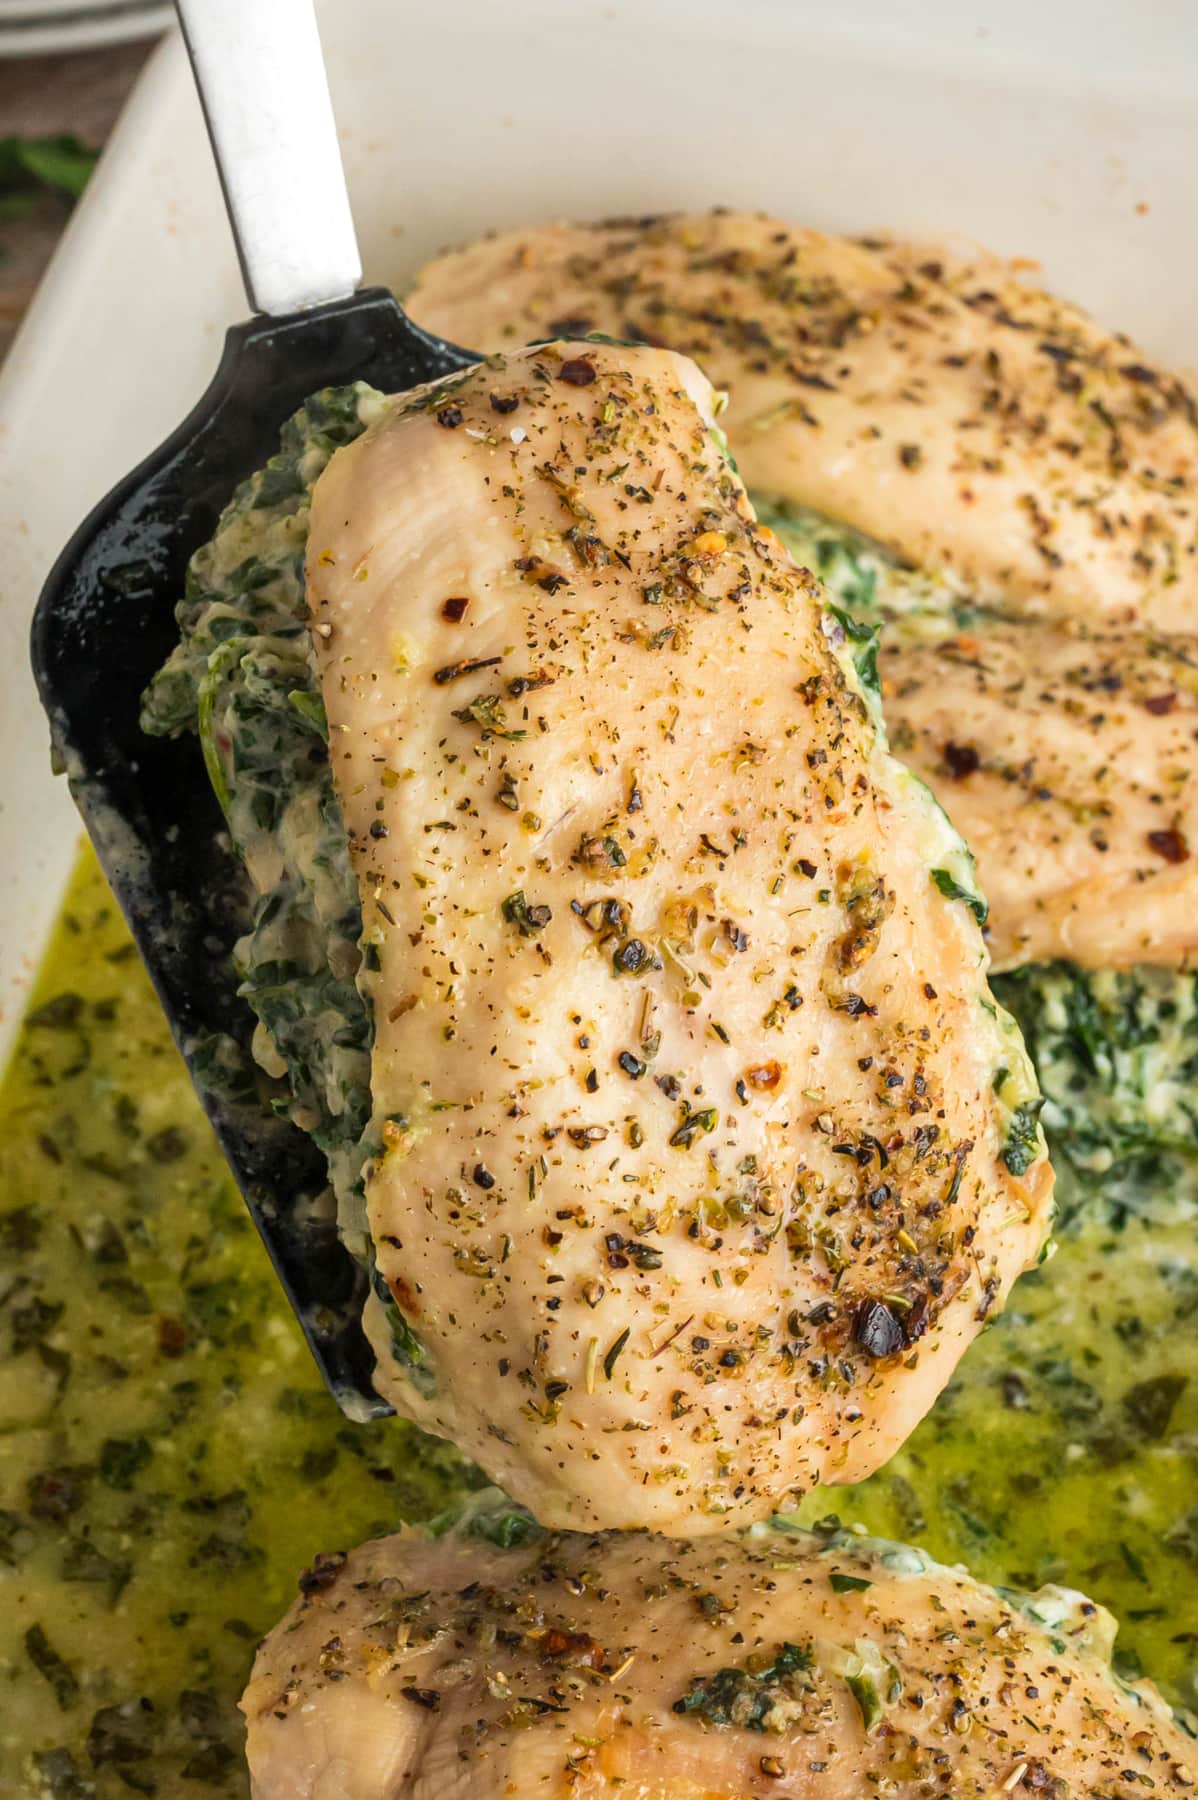 A spatula serving a stuffed chicken breast with spinach